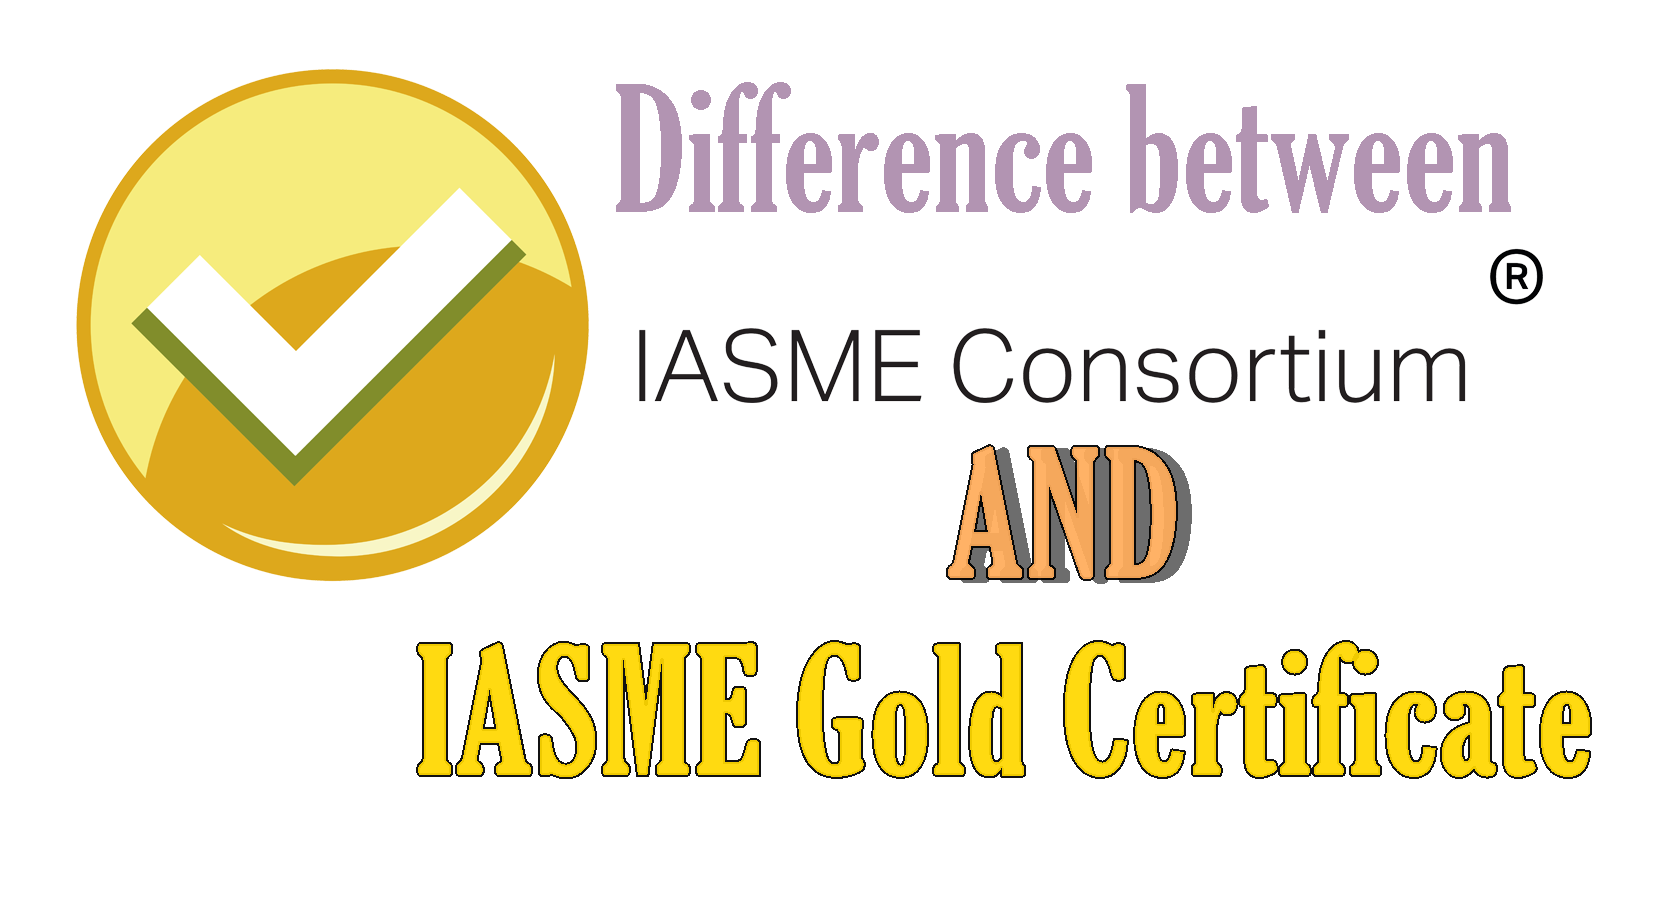 Difference between IASME and IASME Gold Certificate